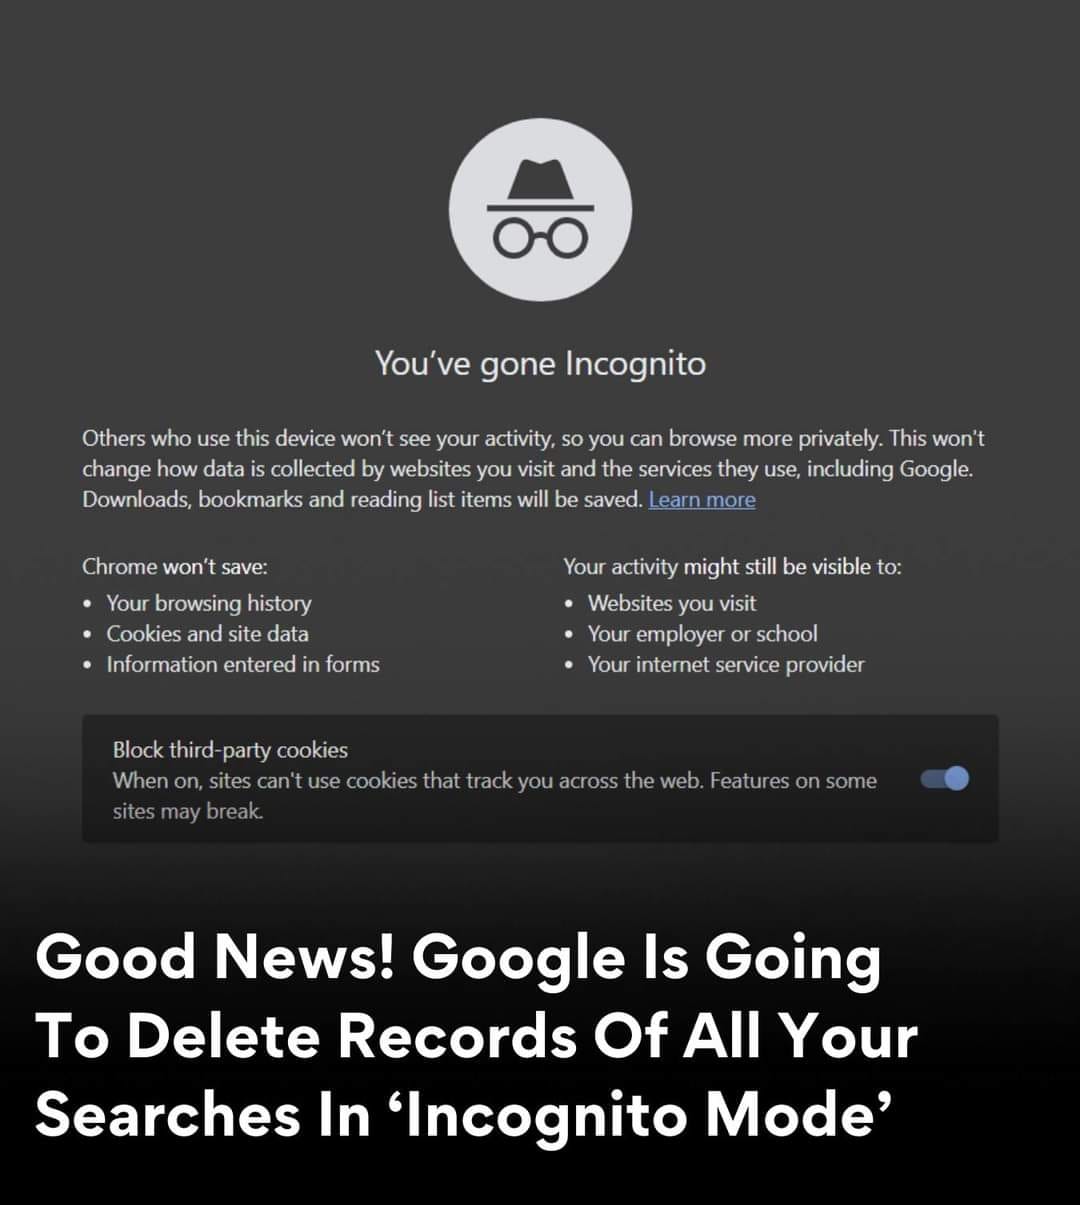 Google is going to delete records of all your searches in Incognito Mode